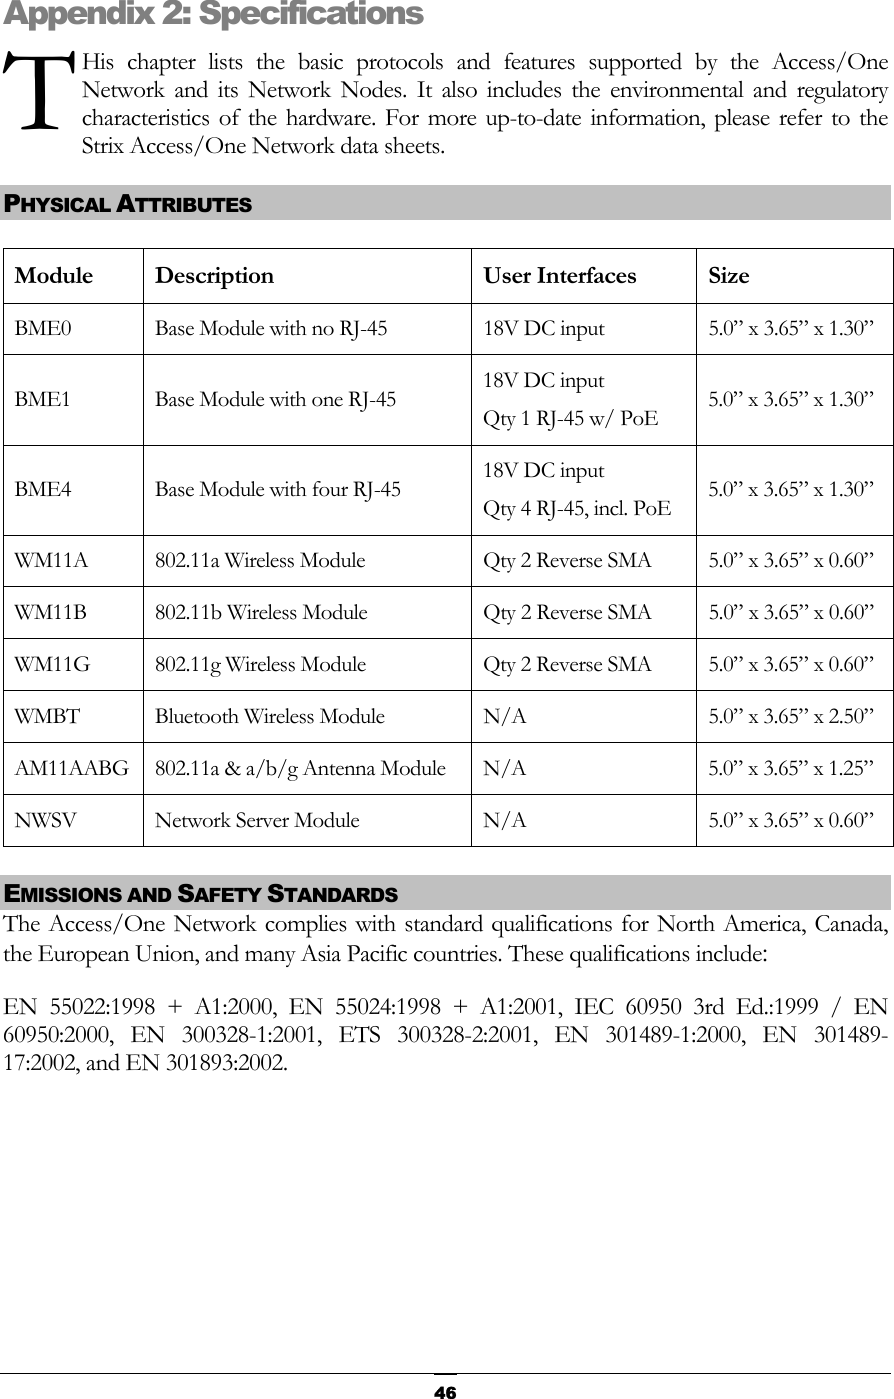  T AppenHis chapter lists the basic protocols and features supported by the Access/One Network and its Network Nodes. It also includes the environmental and regulatory characteristics of the hardware. For more up-to-date information, please refer to the Strix Access/One Network data sheets. dix 2: Specifications PHYSICAL ATTRIBUTES  Module Description  User Interfaces  Size BME0  Base Module with no RJ-45  18V DC input  5.0” x 3.65” x 1.30” BME1  Base Module with one RJ-45  18V DC input Qty 1 RJ-45 w/ PoE  5.0” x 3.65” x 1.30” BME4  Base Module with four RJ-45  18V DC input Qty 4 RJ-45, incl. PoE  5.0” x 3.65” x 1.30” WM11A  802.11a Wireless Module  Qty 2 Reverse SMA  5.0” x 3.65” x 0.60” WM11B  802.11b Wireless Module  Qty 2 Reverse SMA  5.0” x 3.65” x 0.60” WM11G  802.11g Wireless Module  Qty 2 Reverse SMA  5.0” x 3.65” x 0.60” WMBT  Bluetooth Wireless Module  N/A  5.0” x 3.65” x 2.50” AM11AABG  802.11a &amp; a/b/g Antenna Module  N/A  5.0” x 3.65” x 1.25” NWSV  Network Server Module  N/A  5.0” x 3.65” x 0.60”  EMISSIONS AND SAFETY STANDARDS  The Access/One Network complies with standard qualifications for North America, Canada, the European Union, and many Asia Pacific countries. These qualifications include: EN 55022:1998 + A1:2000, EN 55024:1998 + A1:2001, IEC 60950 3rd Ed.:1999 / EN 60950:2000, EN 300328-1:2001, ETS 300328-2:2001, EN 301489-1:2000, EN 301489-17:2002, and EN 301893:2002.     46